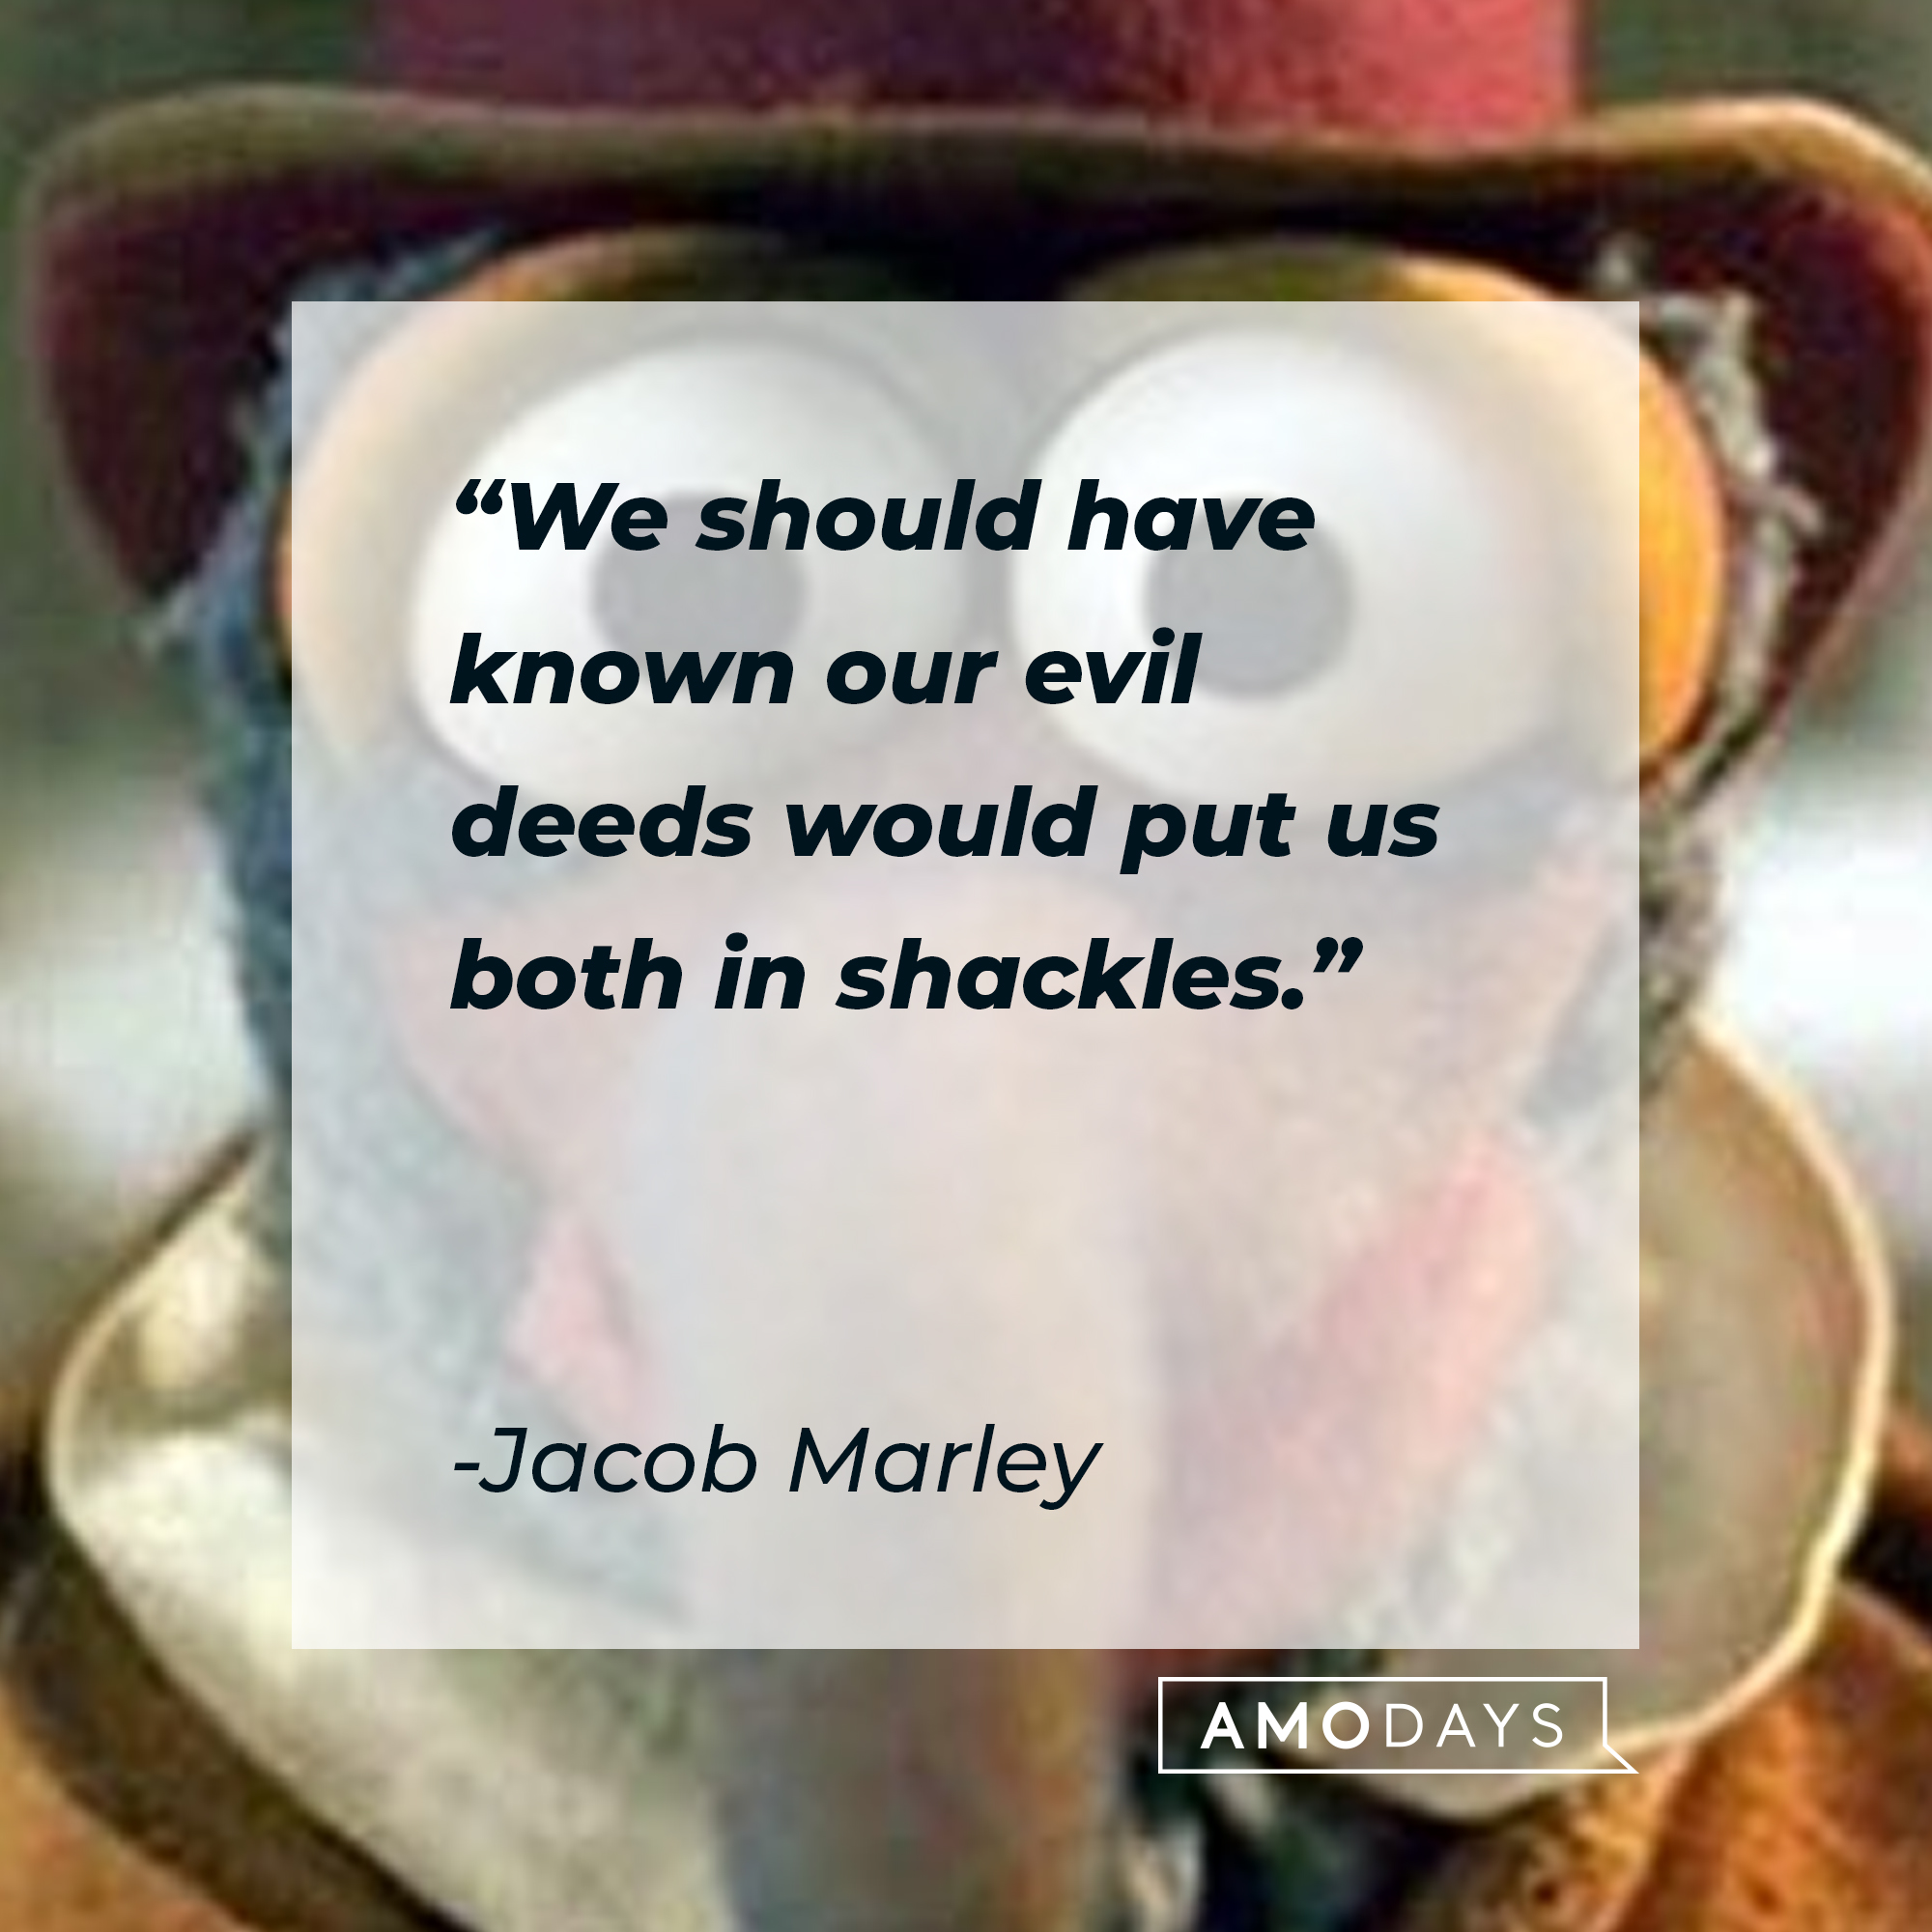 Jacob Marley's quote: “We should have known our evil deeds/Would put us both in shackles.” | Source: facebook.com/The Muppets Christmas Carol